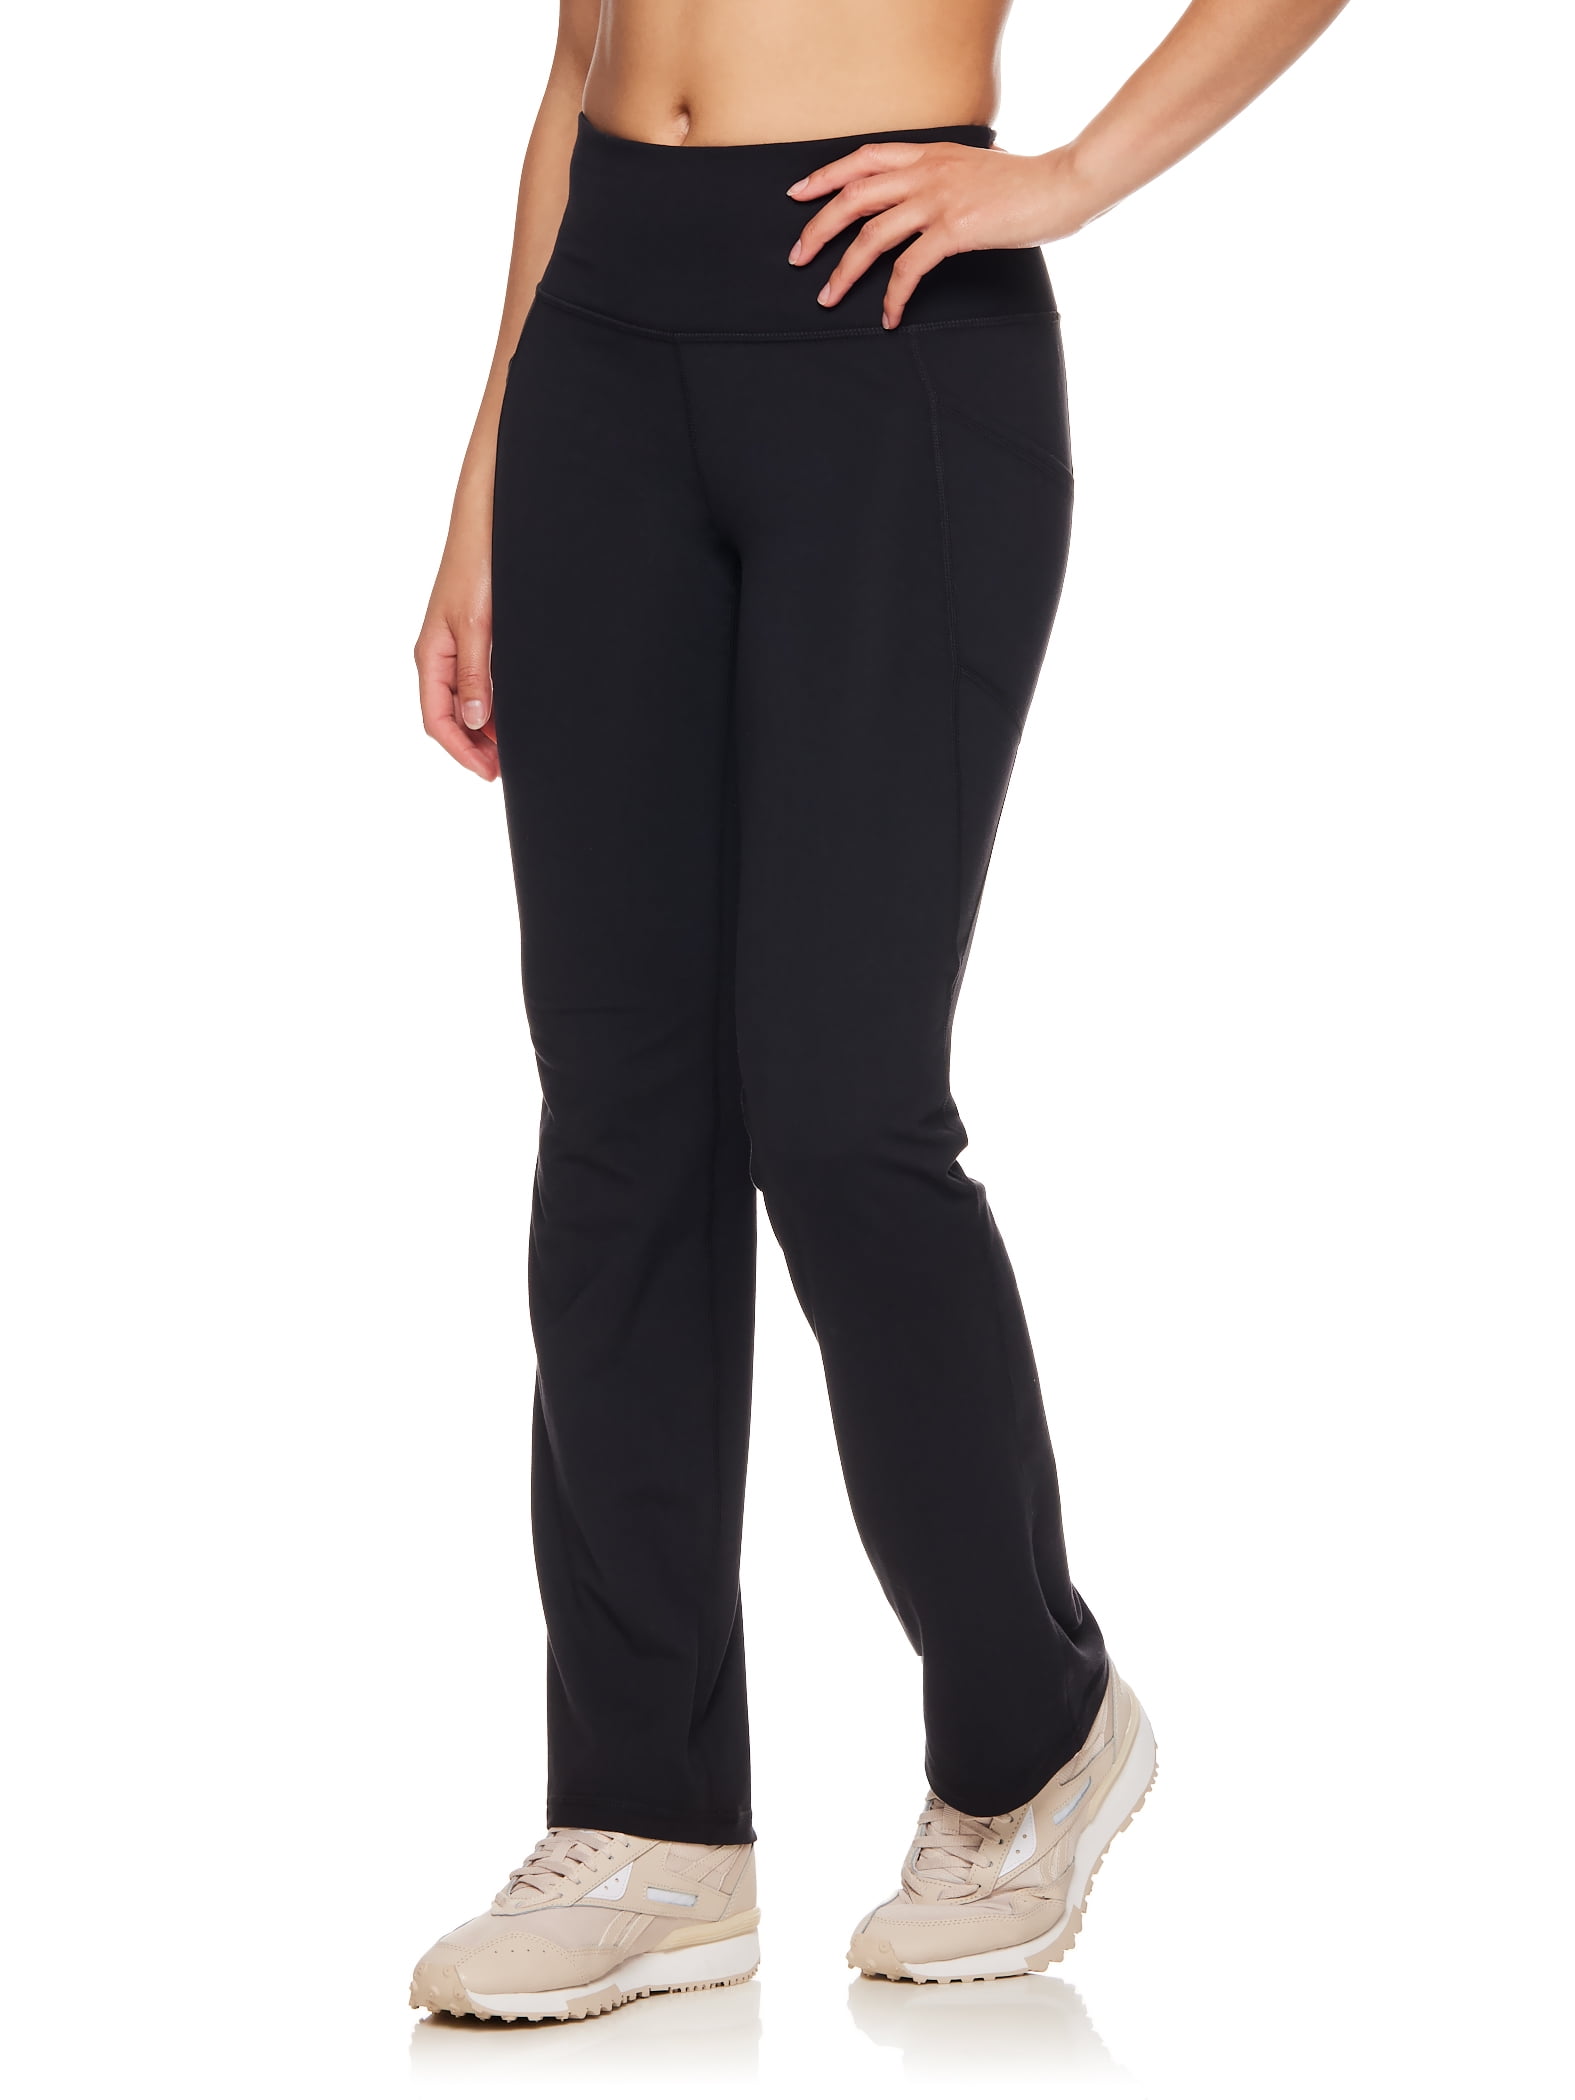 Reebok Women's and Women's Plus Size Everyday High Rise Pant With Pocket,  Sizes S-4X